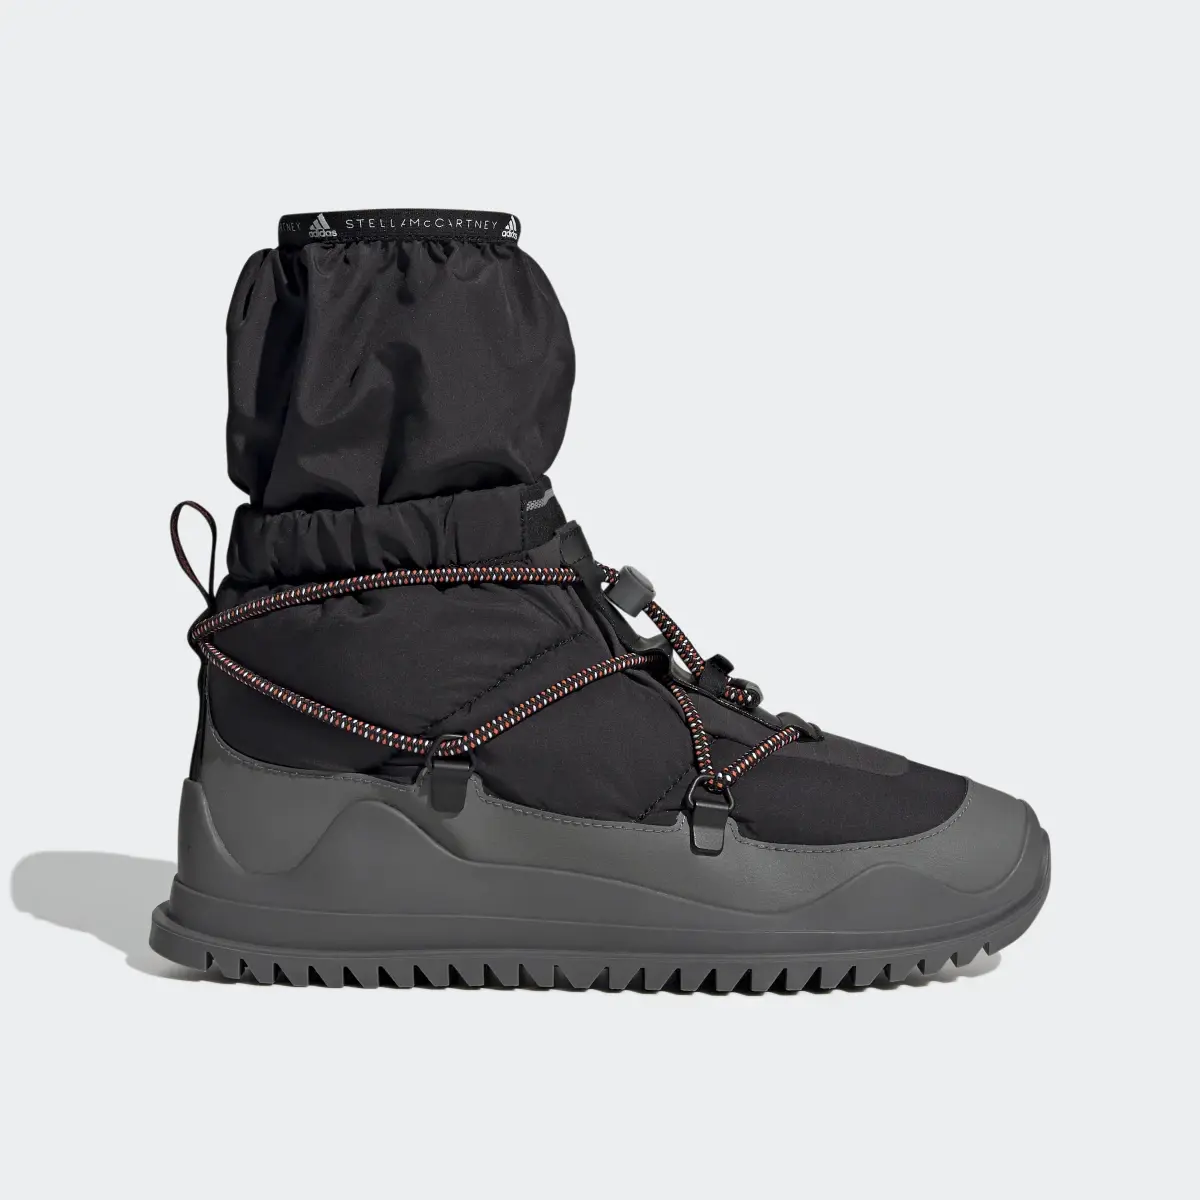 Adidas by Stella McCartney COLD.RDY Winter Boots. 2